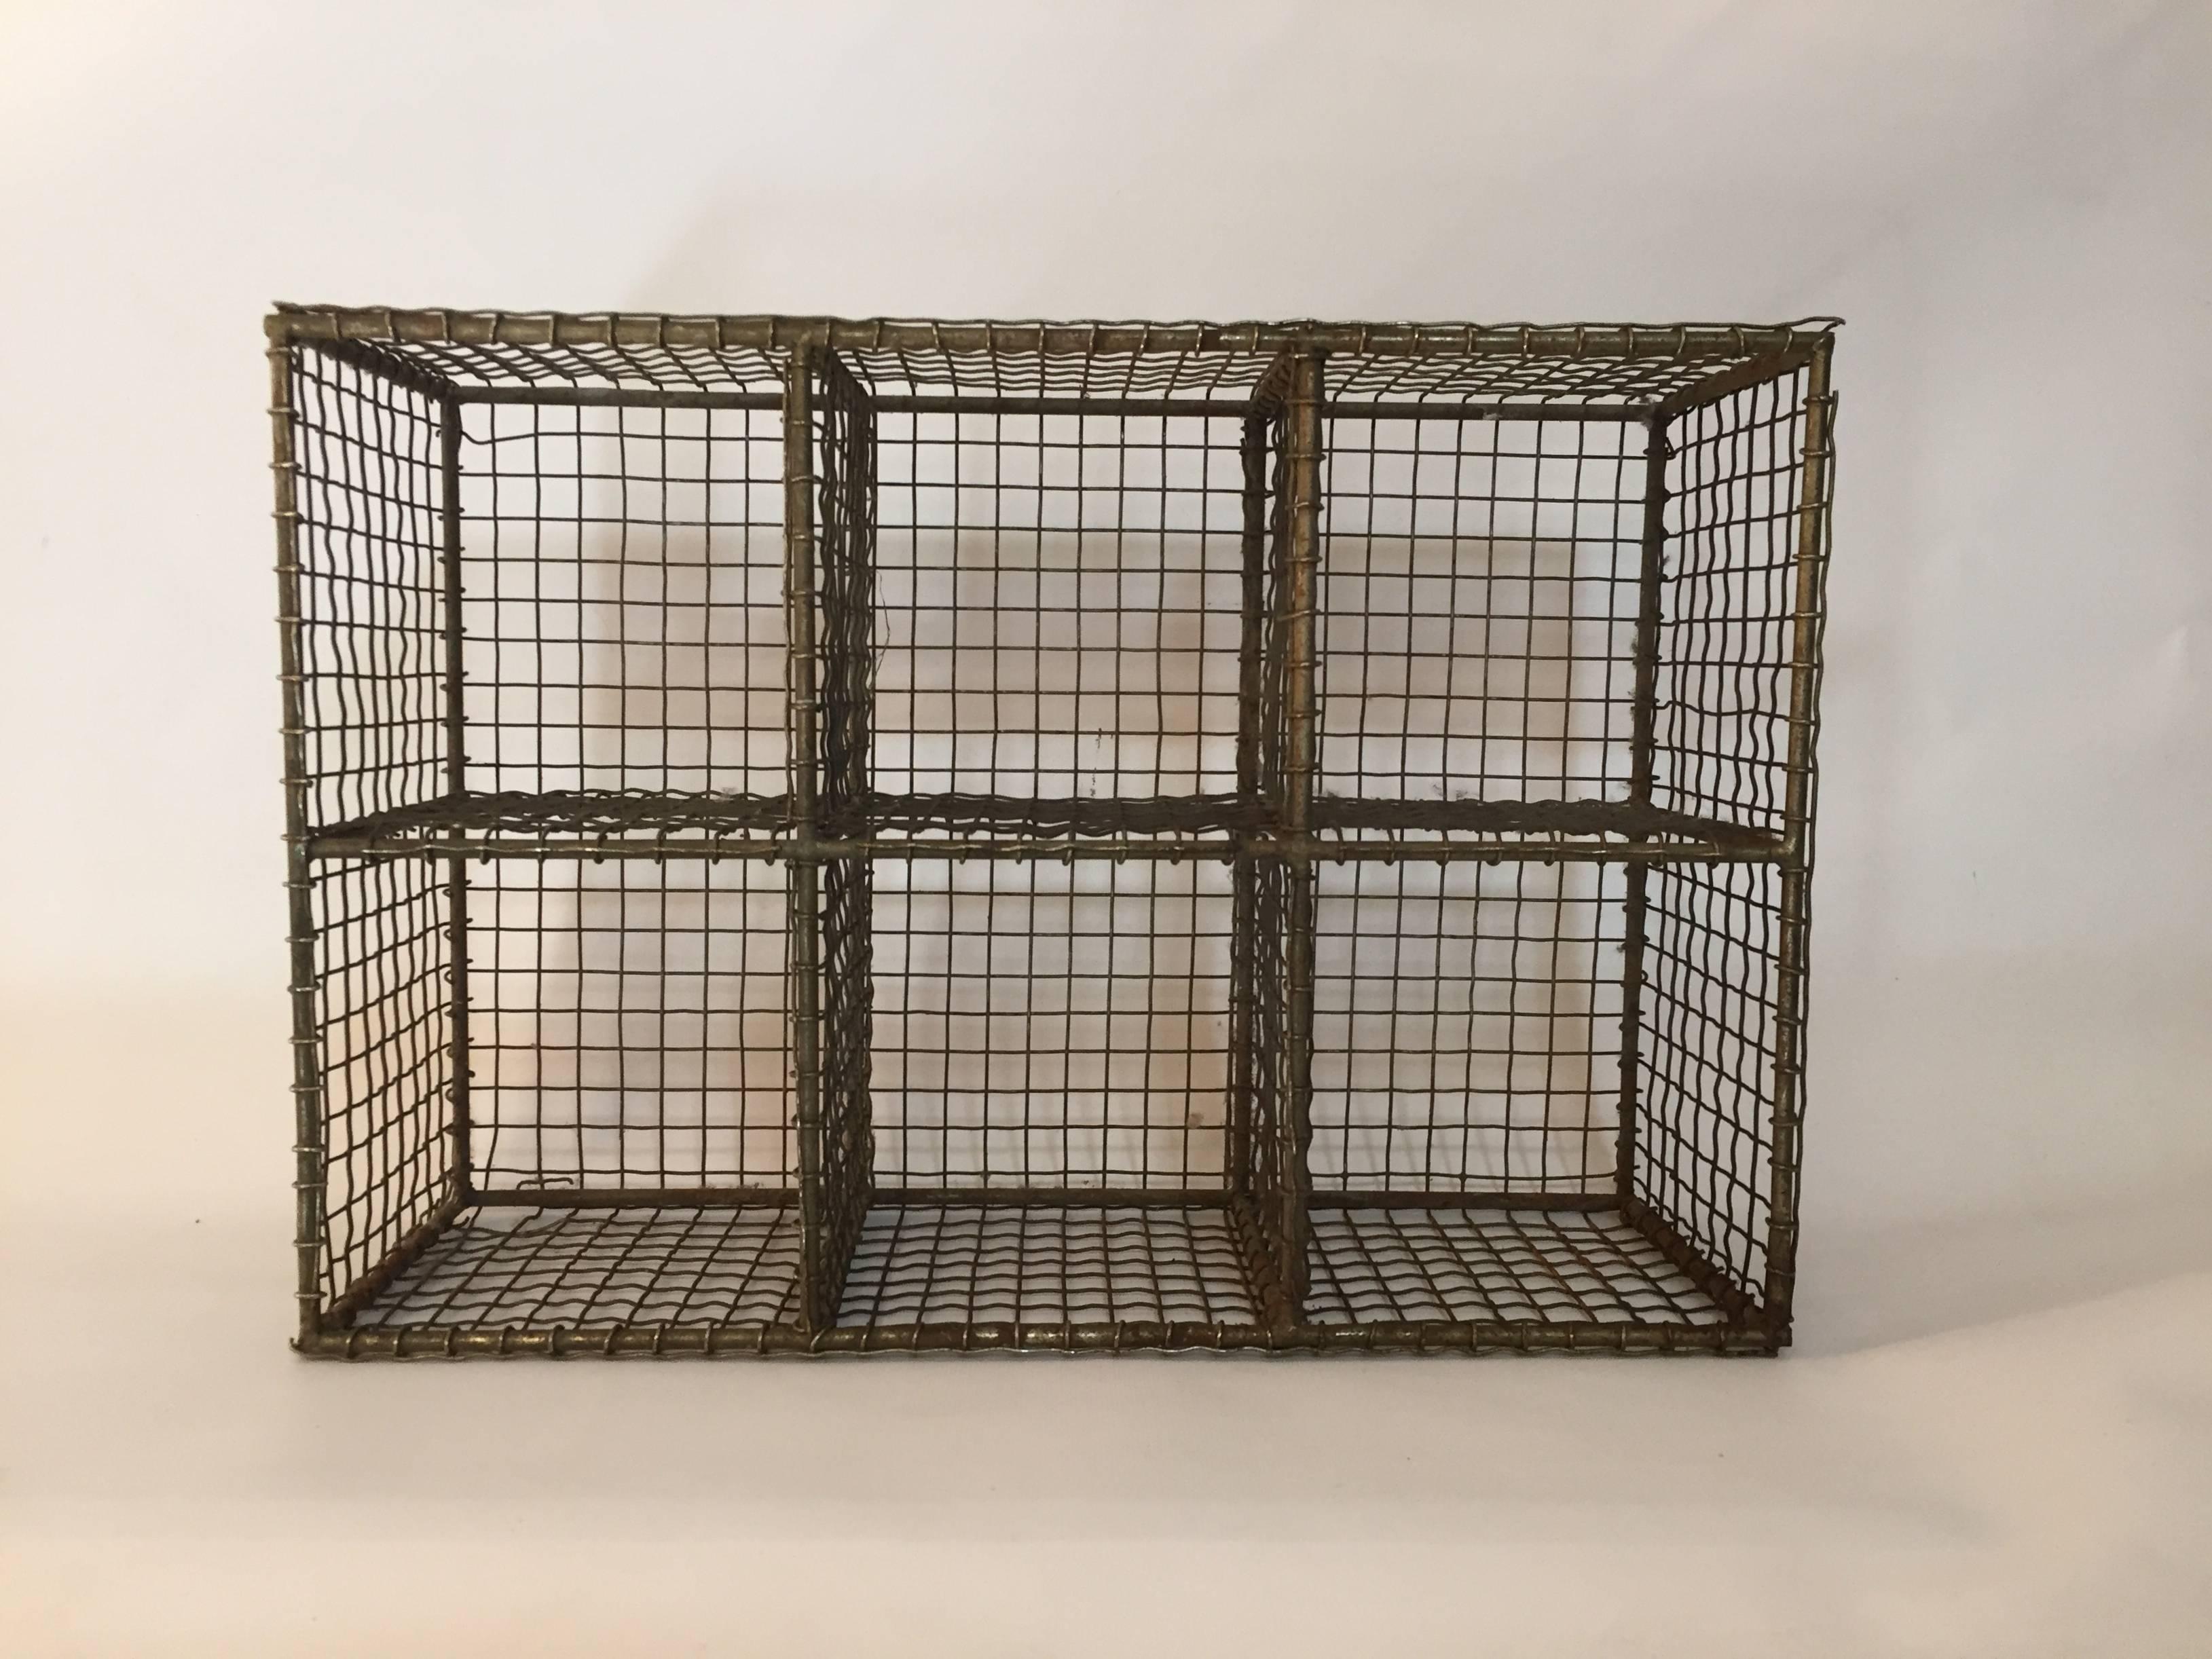 Six square compartments made up of galvanized wire and steel rod. Each compartment measures 5.38" x 5.38". No hangers, so it can be used as a table top piece or hung on a wall.